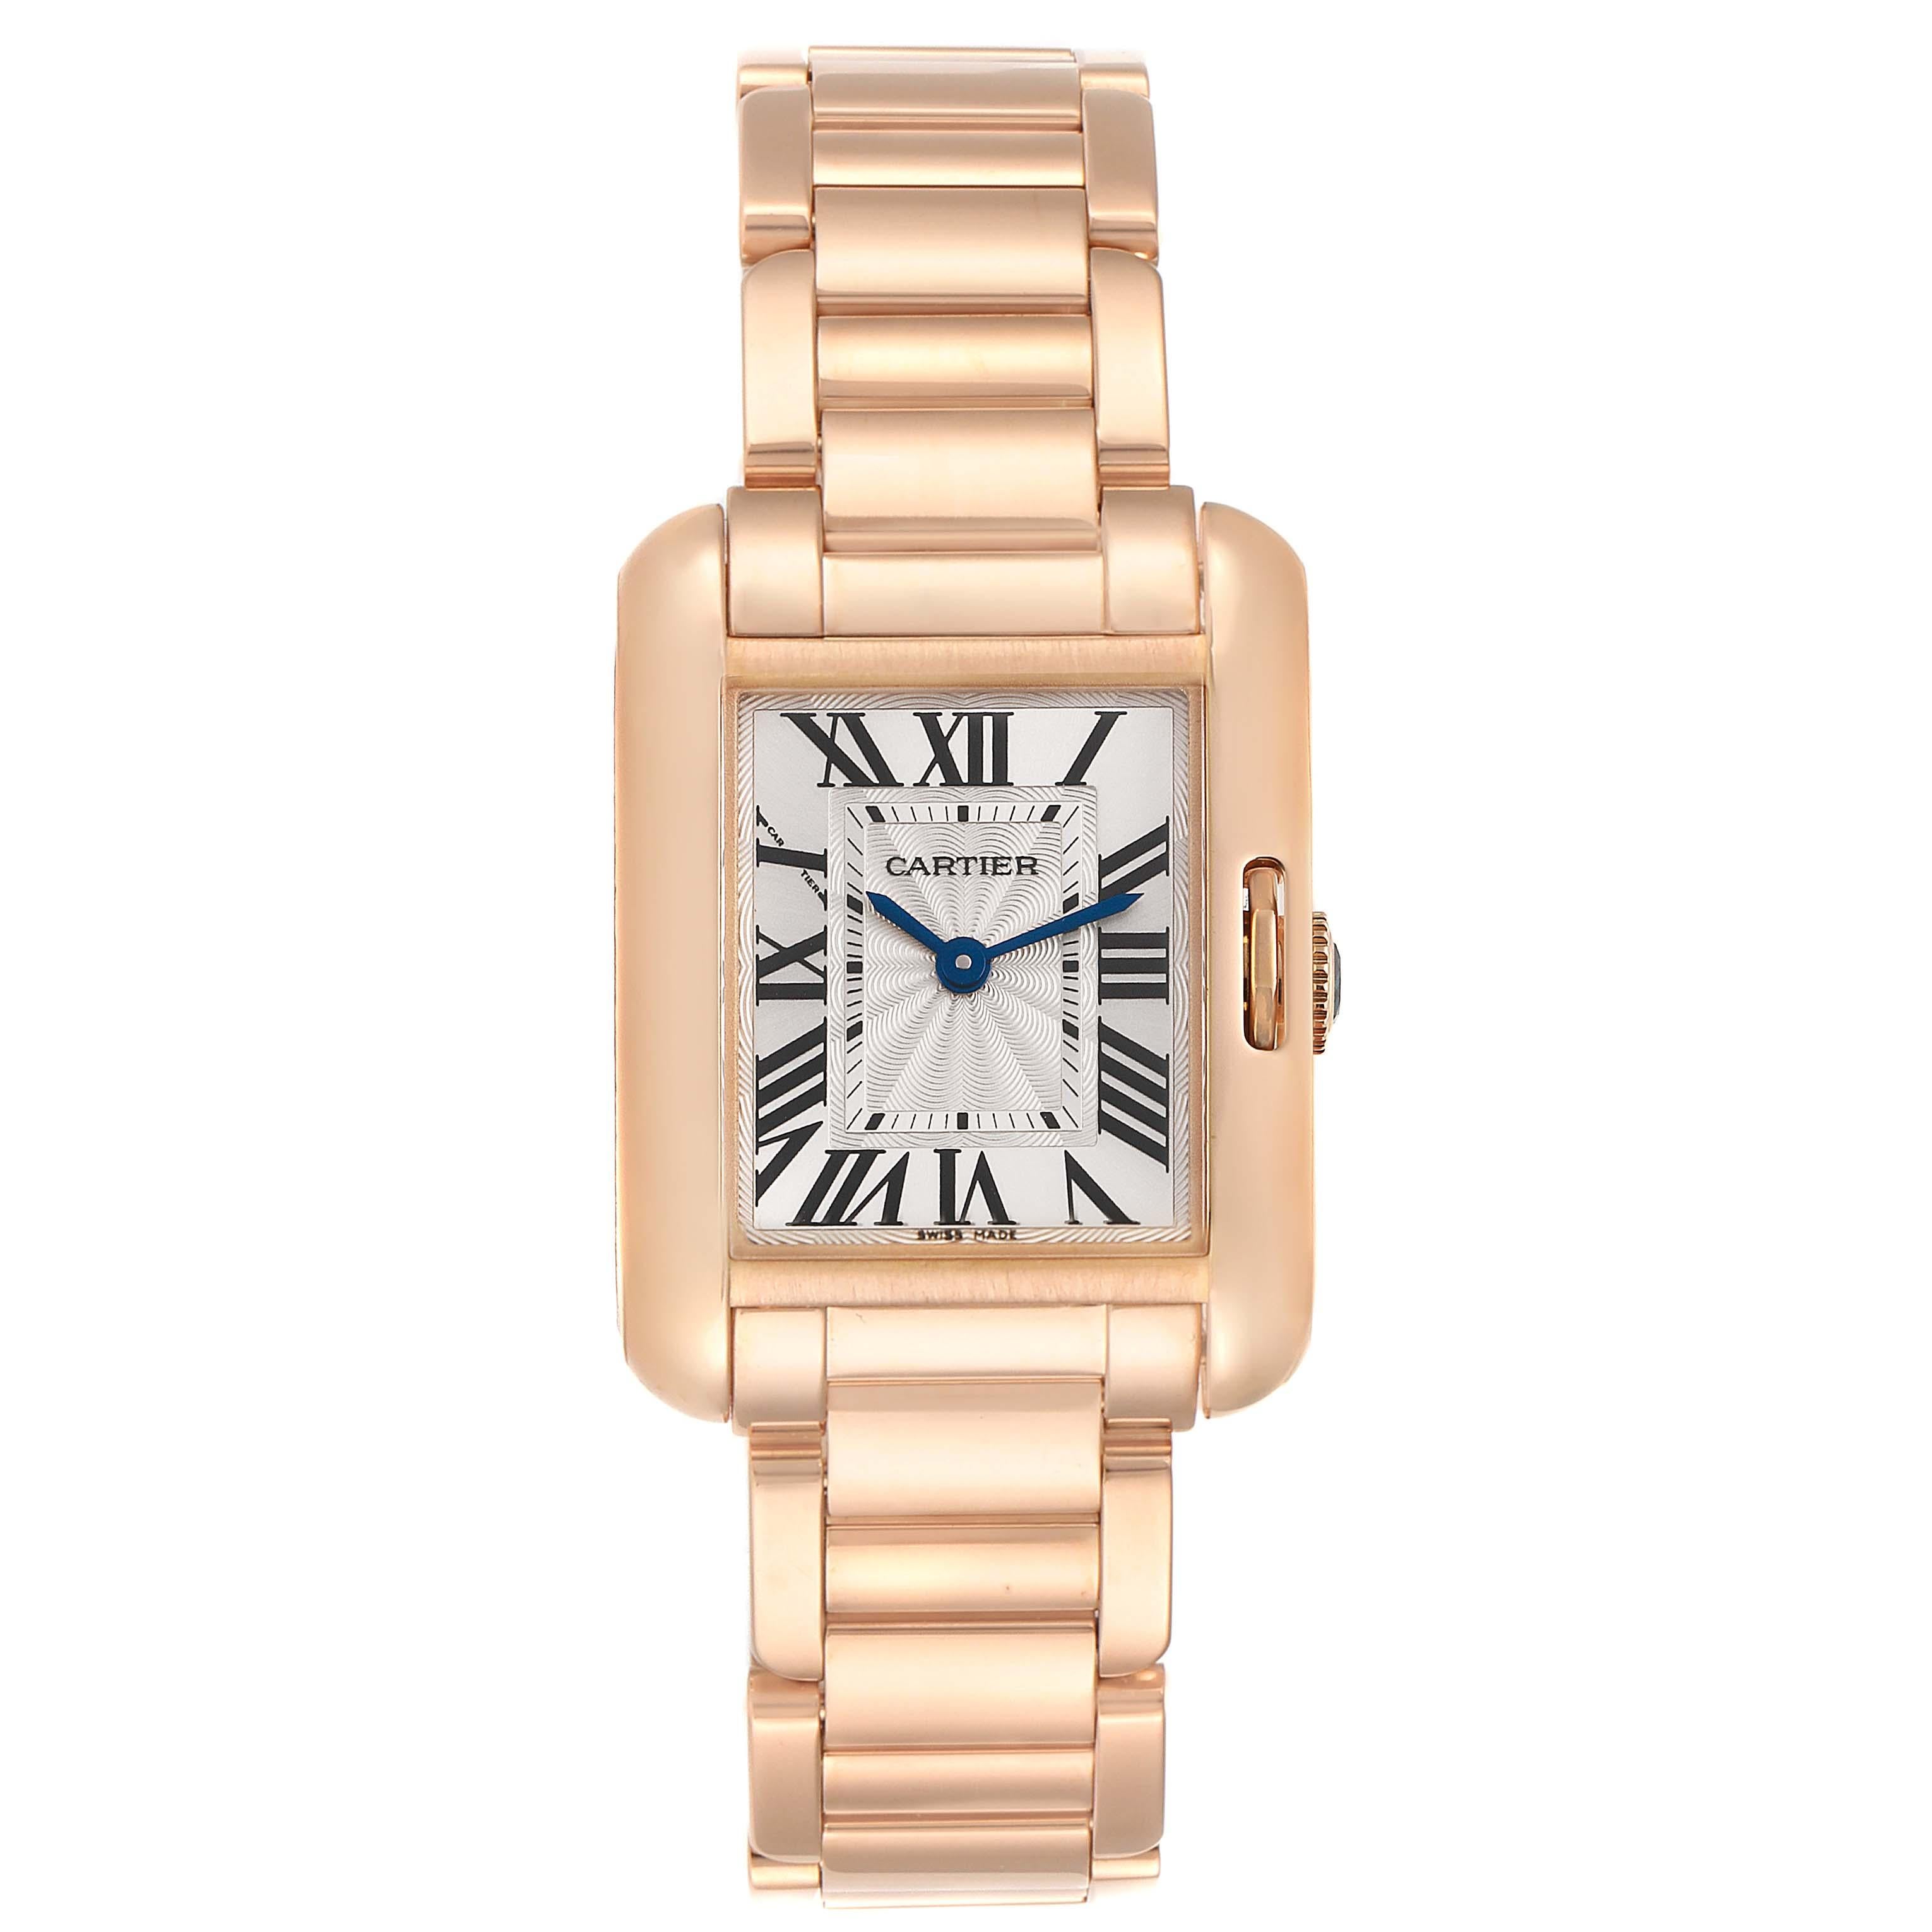 Cartier Tank Anglaise Small Silver Dial Rose Gold Ladies Watch W5310013. Quartz movement. 18K rose gold case 30.2 x 22.7 mm. Circular grained crown set with the blue spinel cabochon. . Scratch resistant sapphire crystal. Flinque and silvered dial